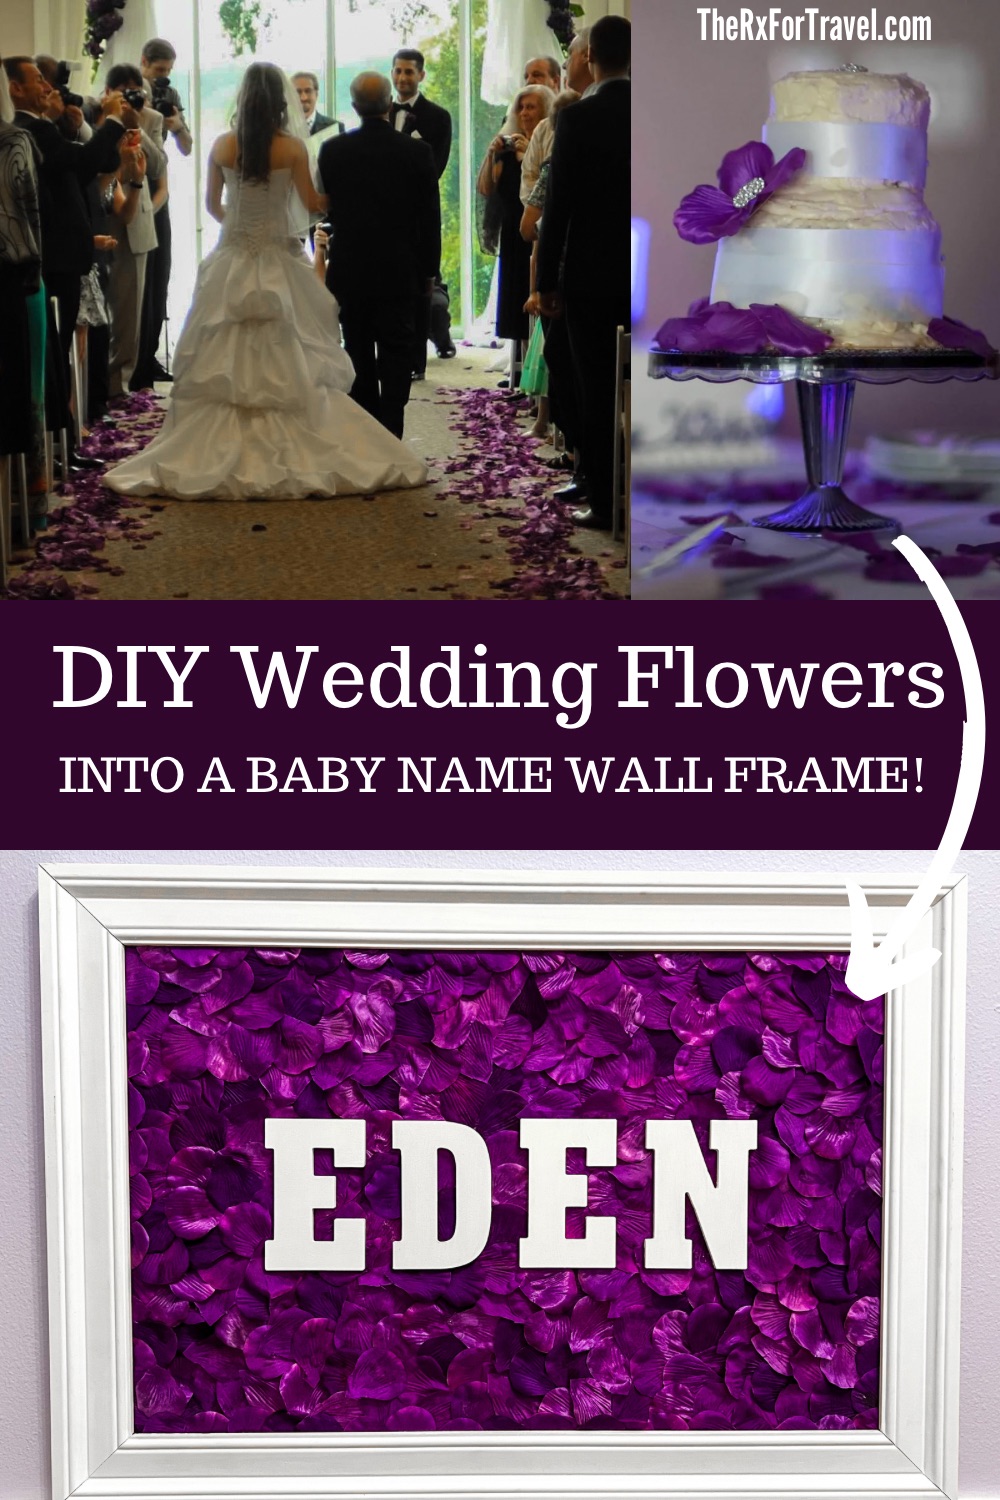 We used the beautiful faux flower petals lining our wedding aisle to make a baby name wall decor for our little girl's nursery. Learn step by step how you can too.